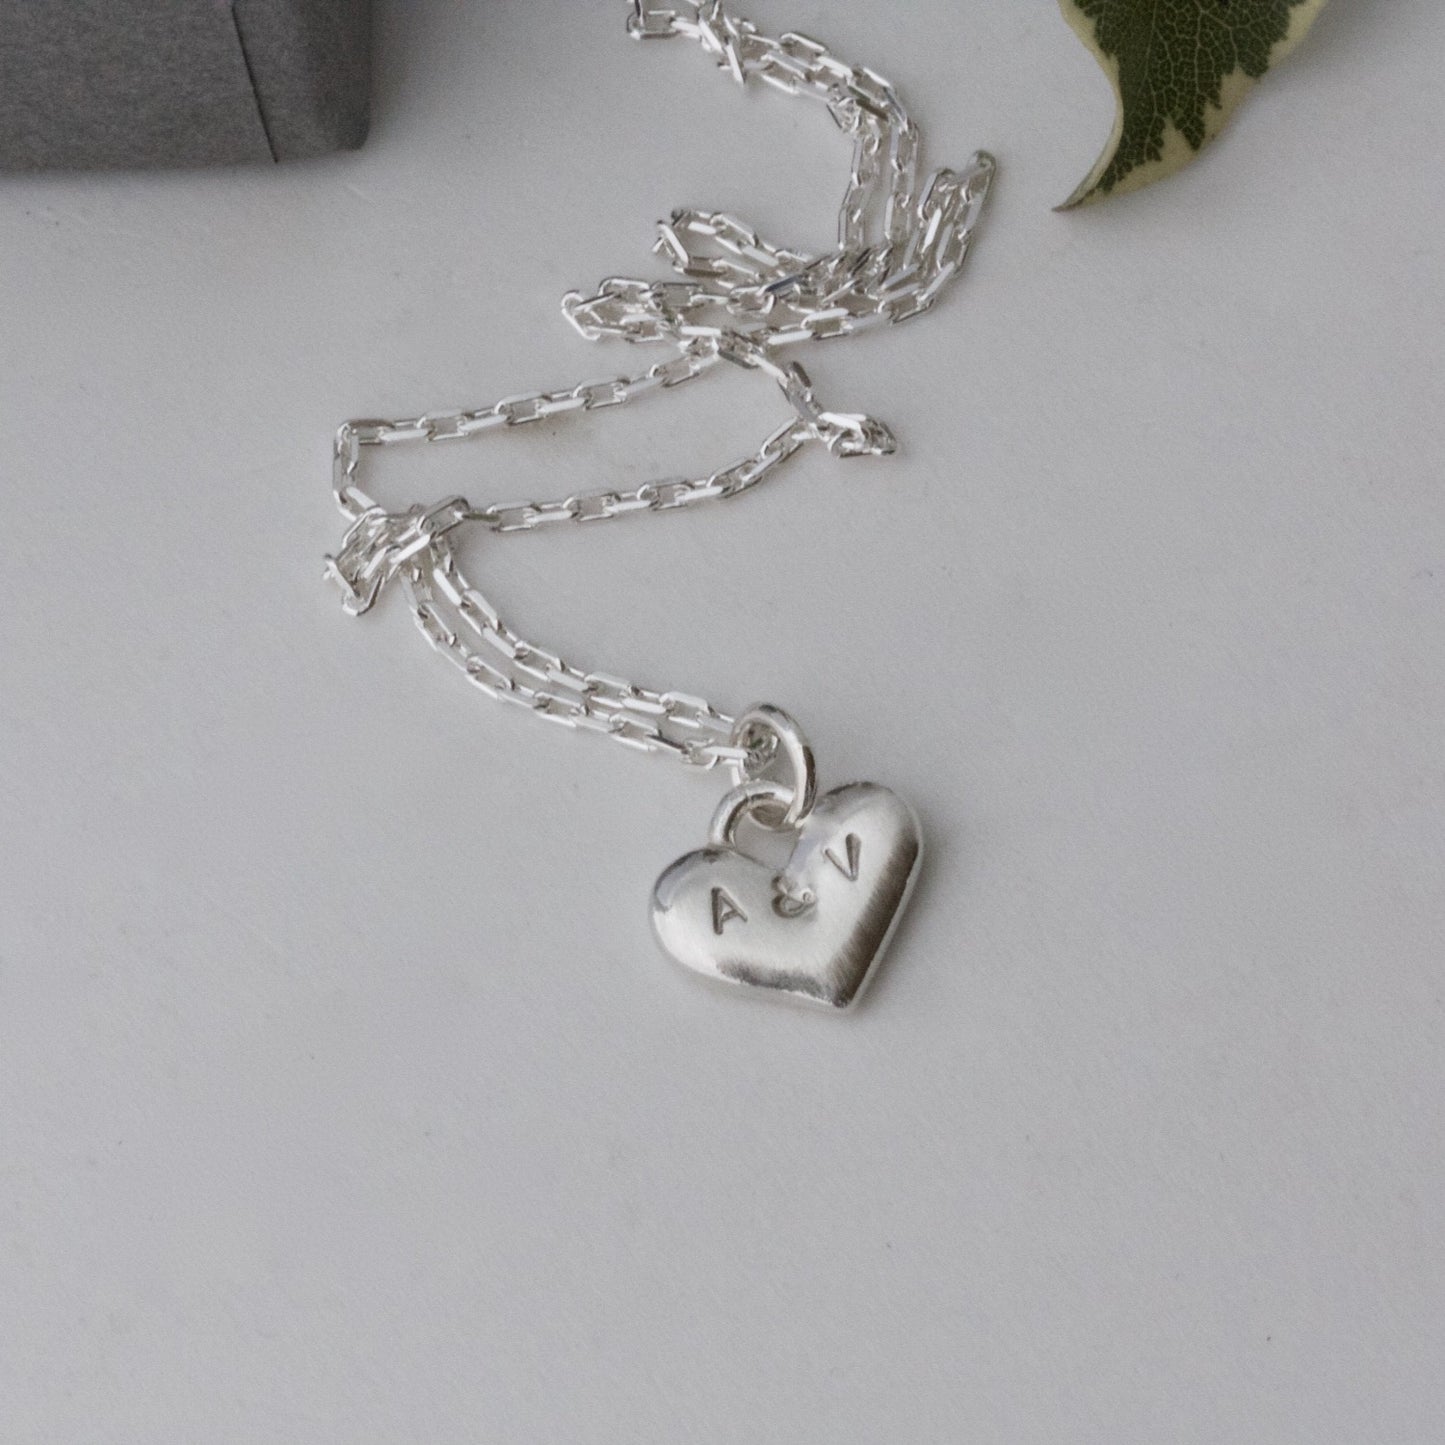 Silver Love Heart Necklace